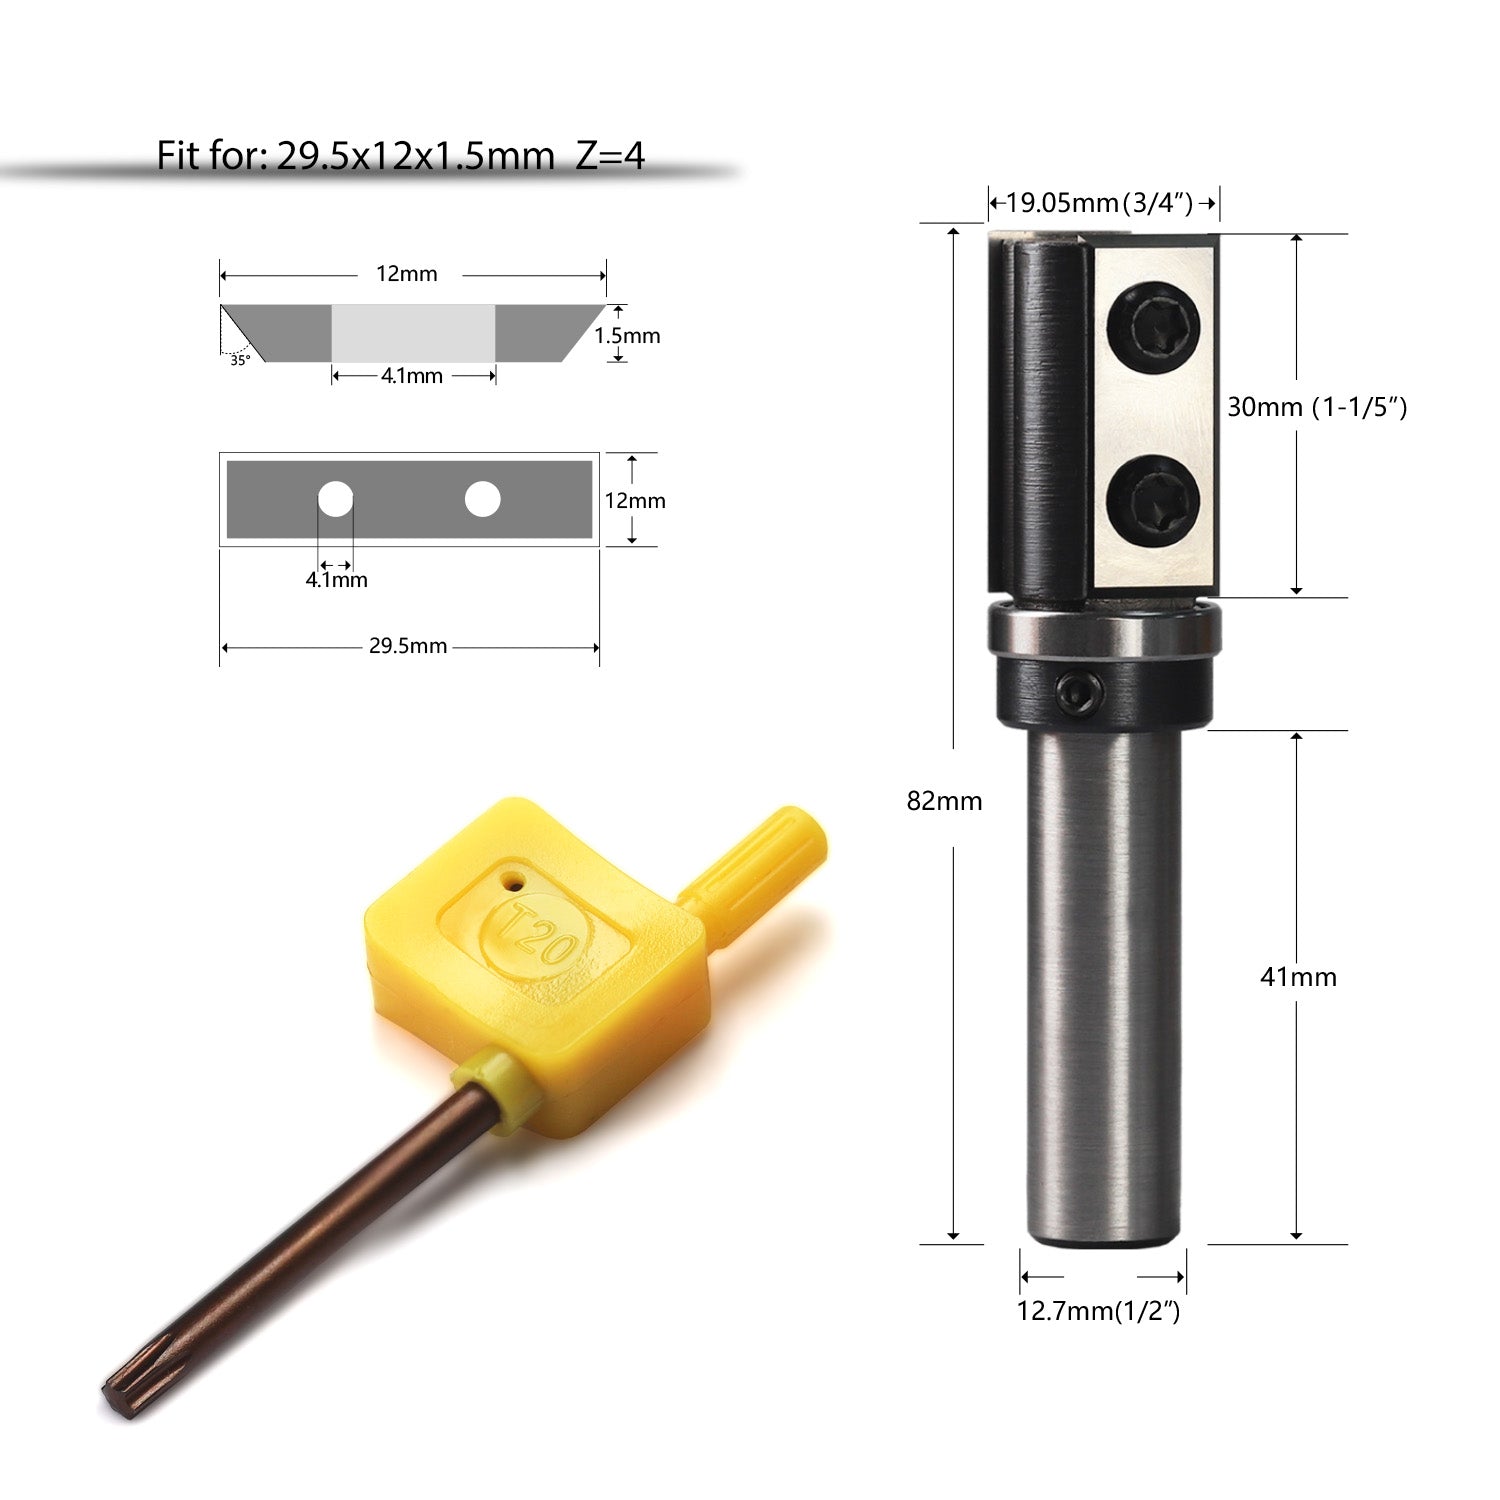 yeptooling top bearing flush trim router bit with 2 pieces carbide inserts, 1/2 inch 12.7 mm shank diameter, 3/4 inch 19.05 mm cutting diameter,1-1/5 inch 30 mm cutting length, 3-1/5 inch 82 mm overall length